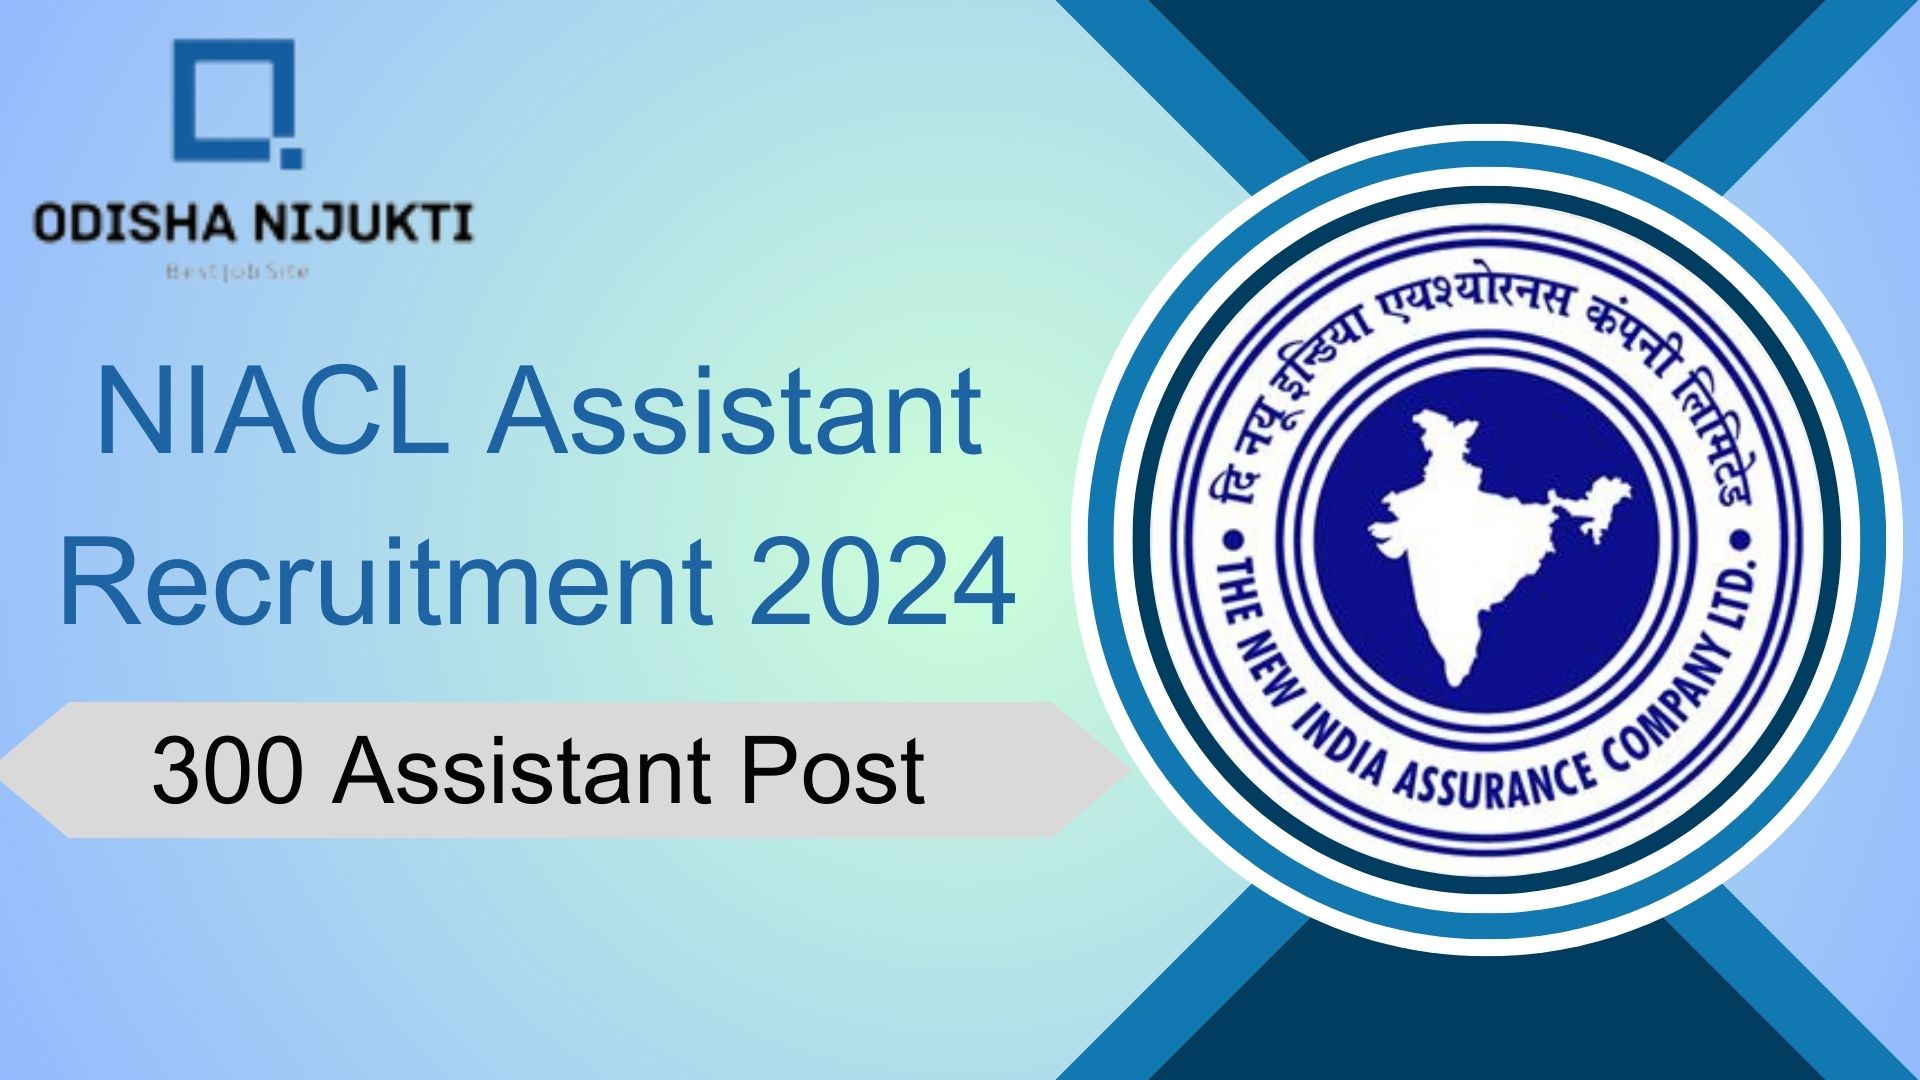 NIACL-Assistant-Recruitment-2024-for-300-Assistant-Post-Vacancies-